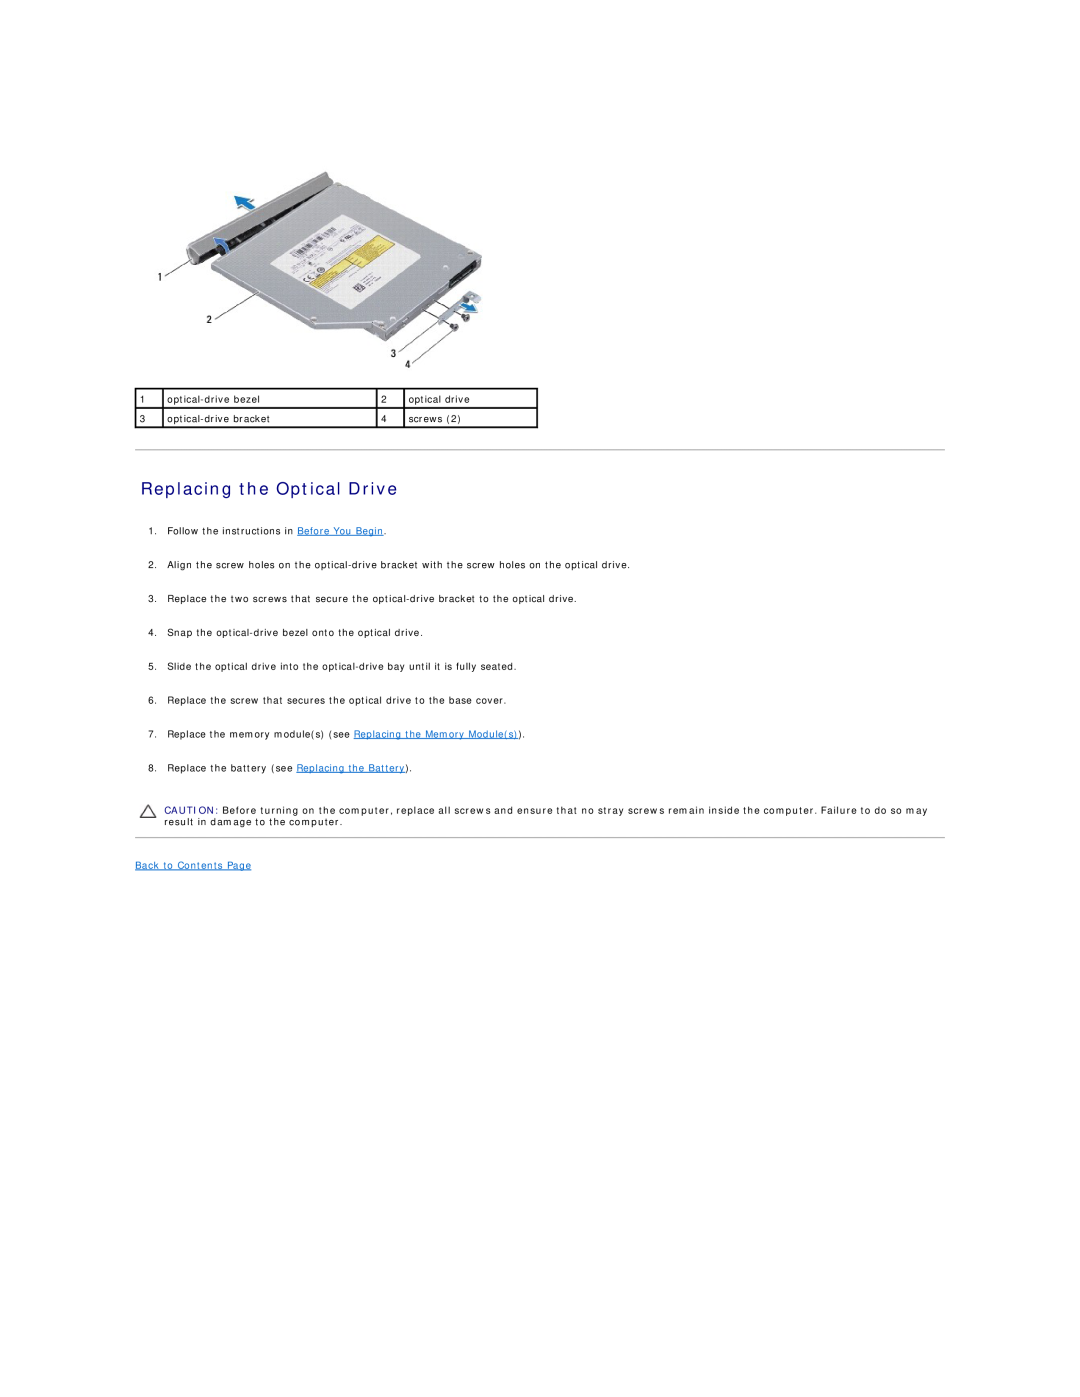 Dell L401X manual Replacing the Optical Drive, Back to Contents Page 